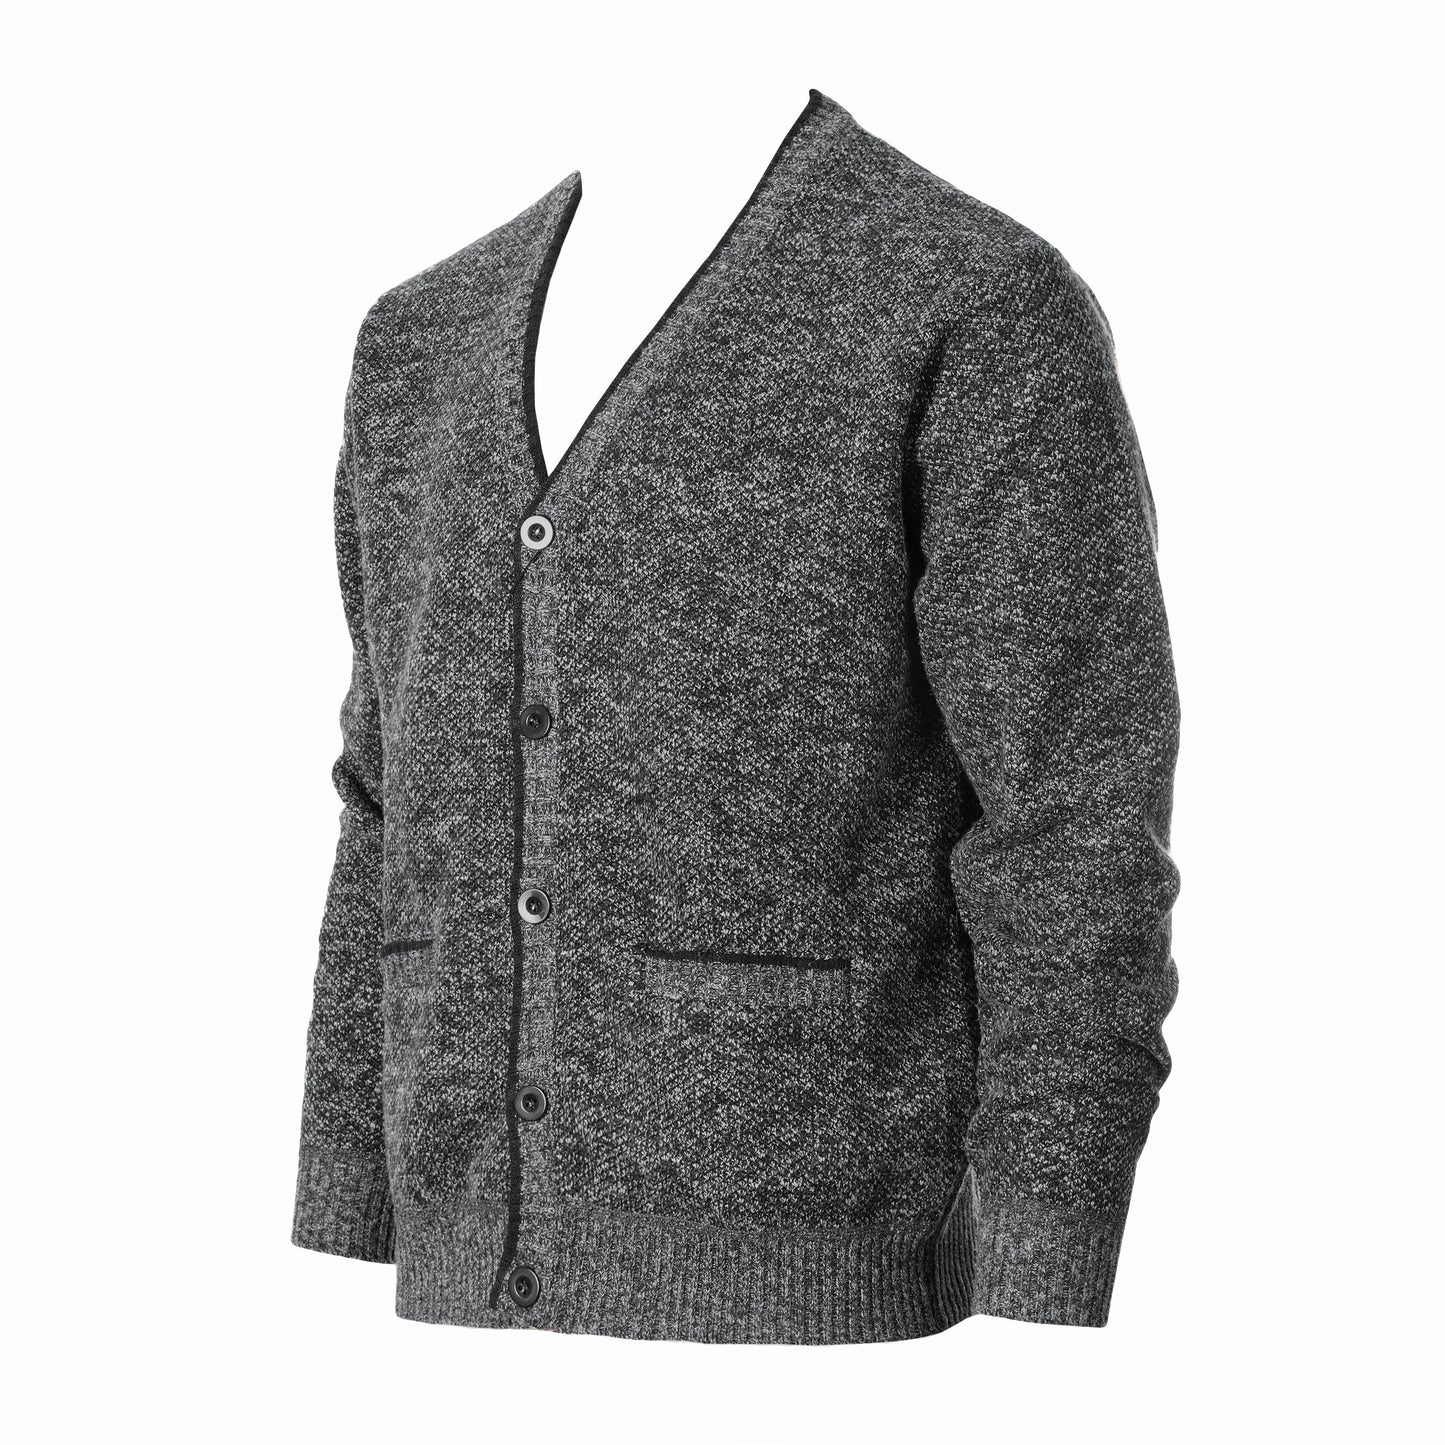 Cardigan Sweater with Soft Brushed Flannel Lining and Pockets -Charcoal